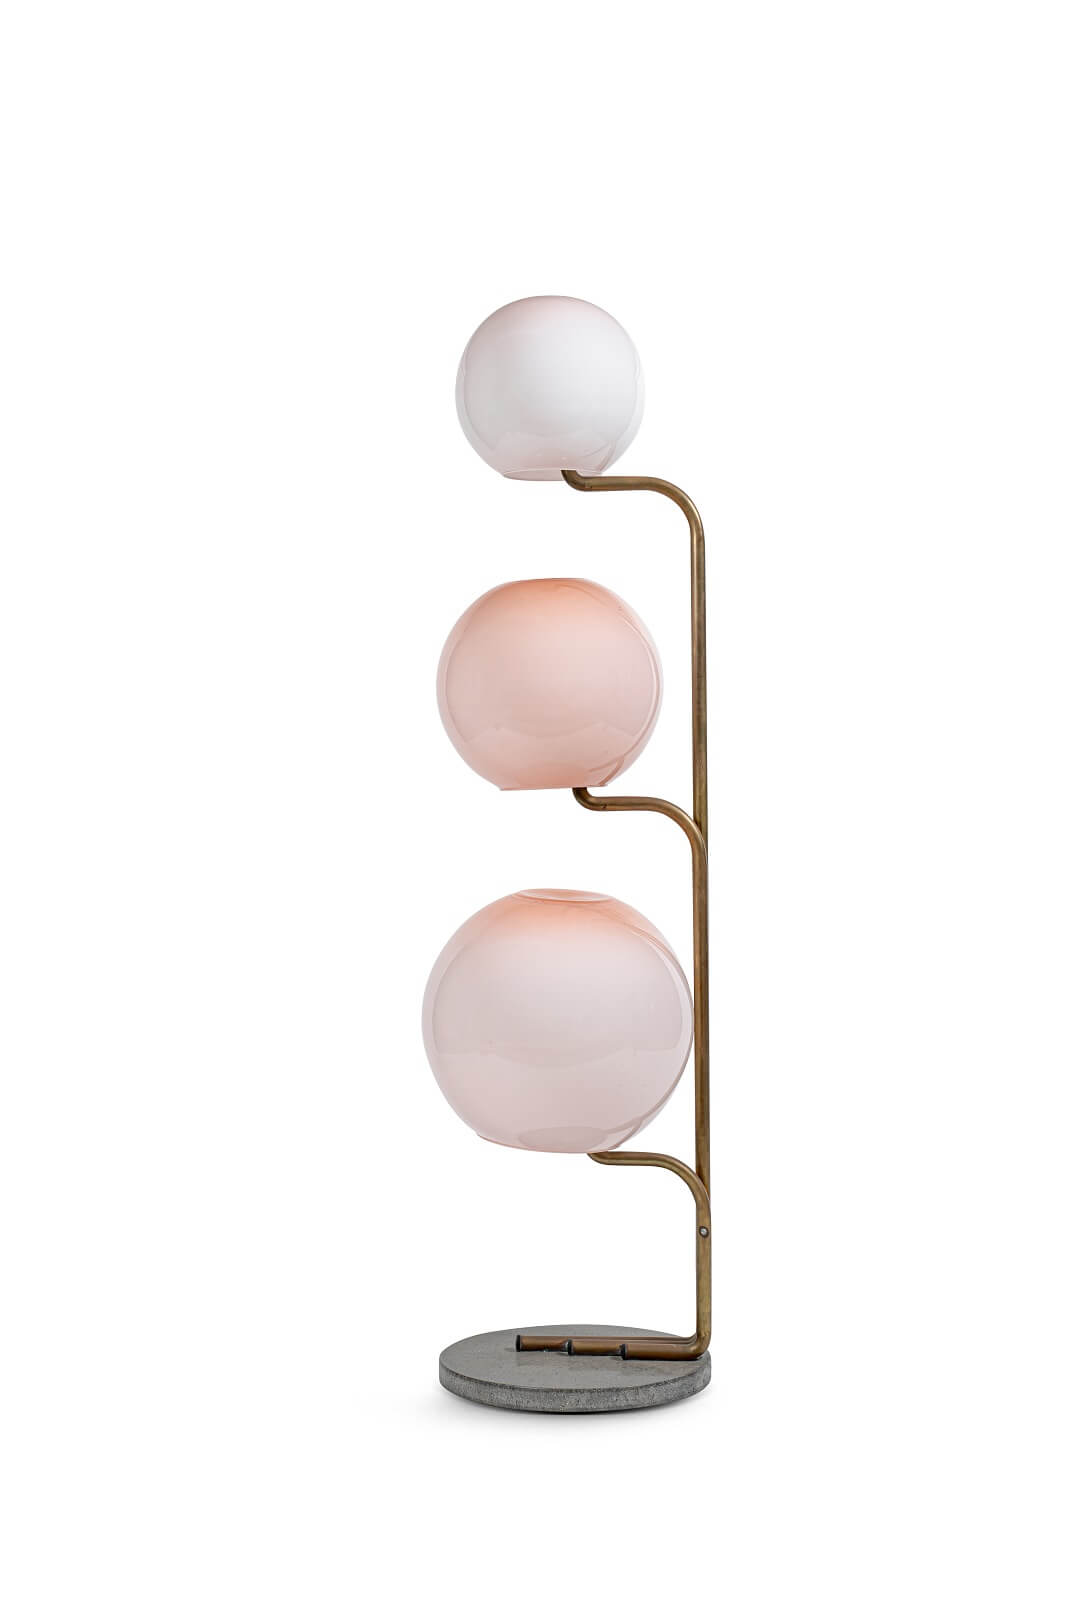 Floor lamp Tre Sfere by A.V. Mazegga for sale